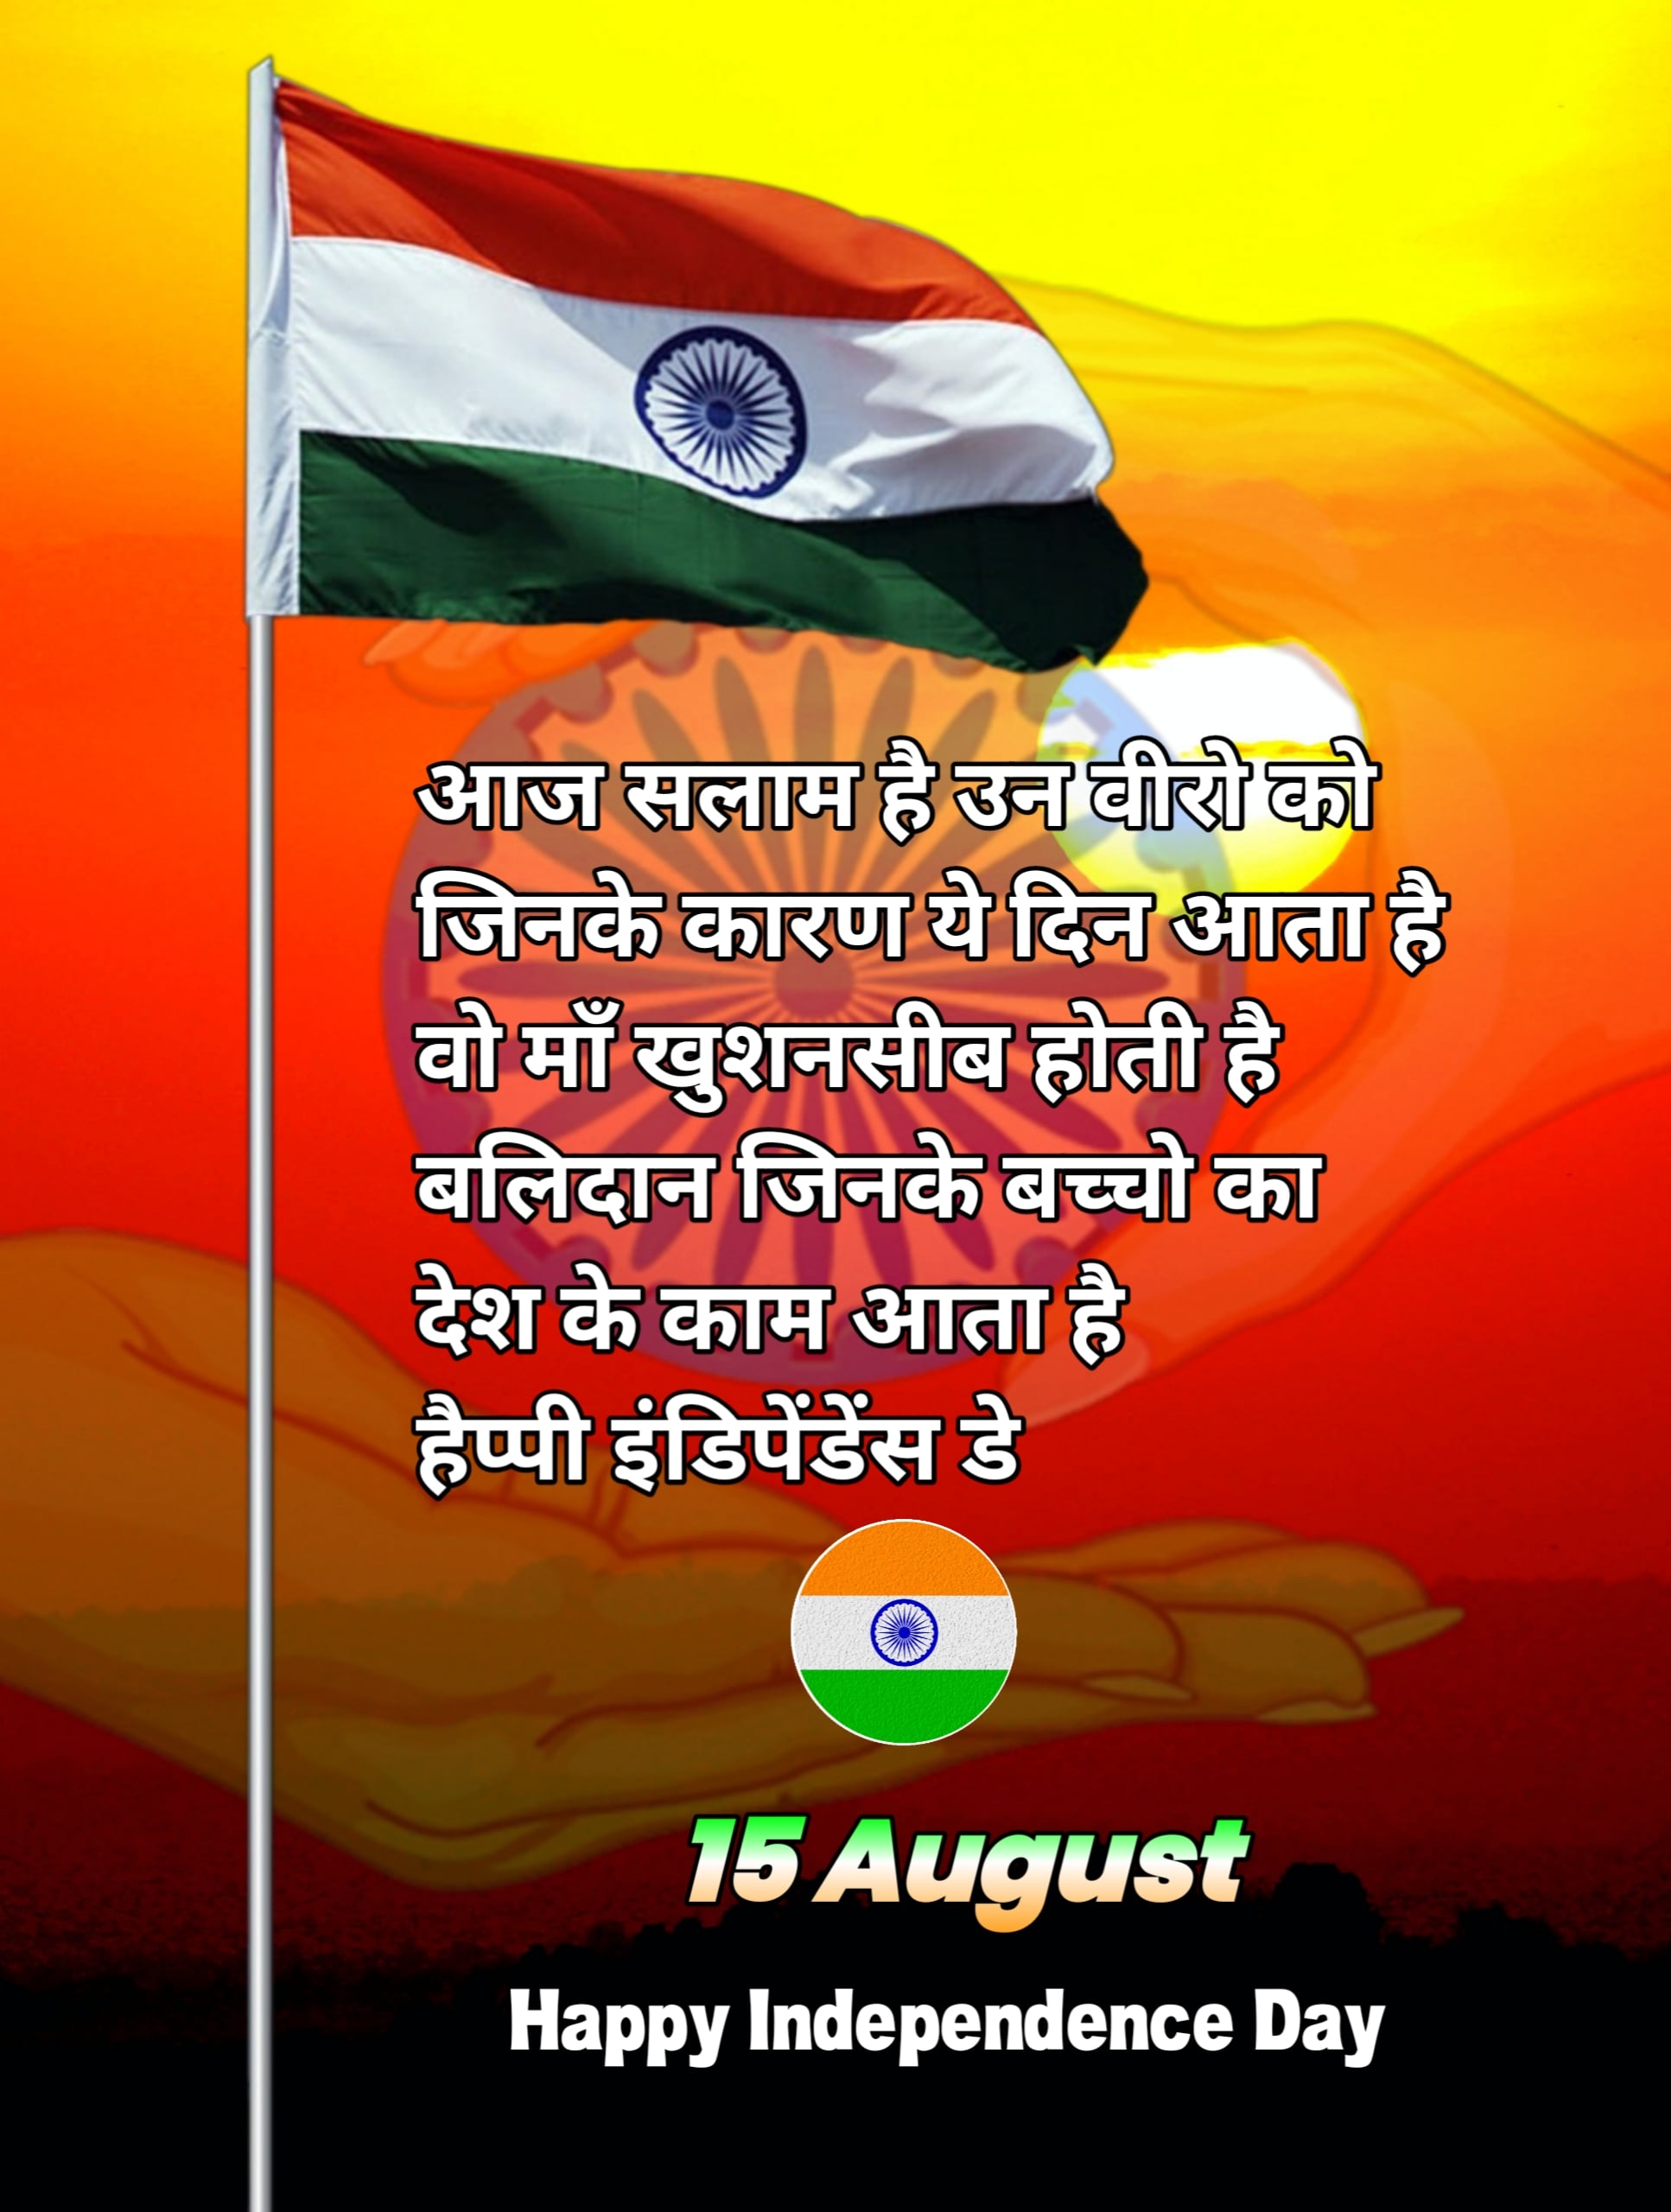 Happy 15 August Independence Day Image With Quote